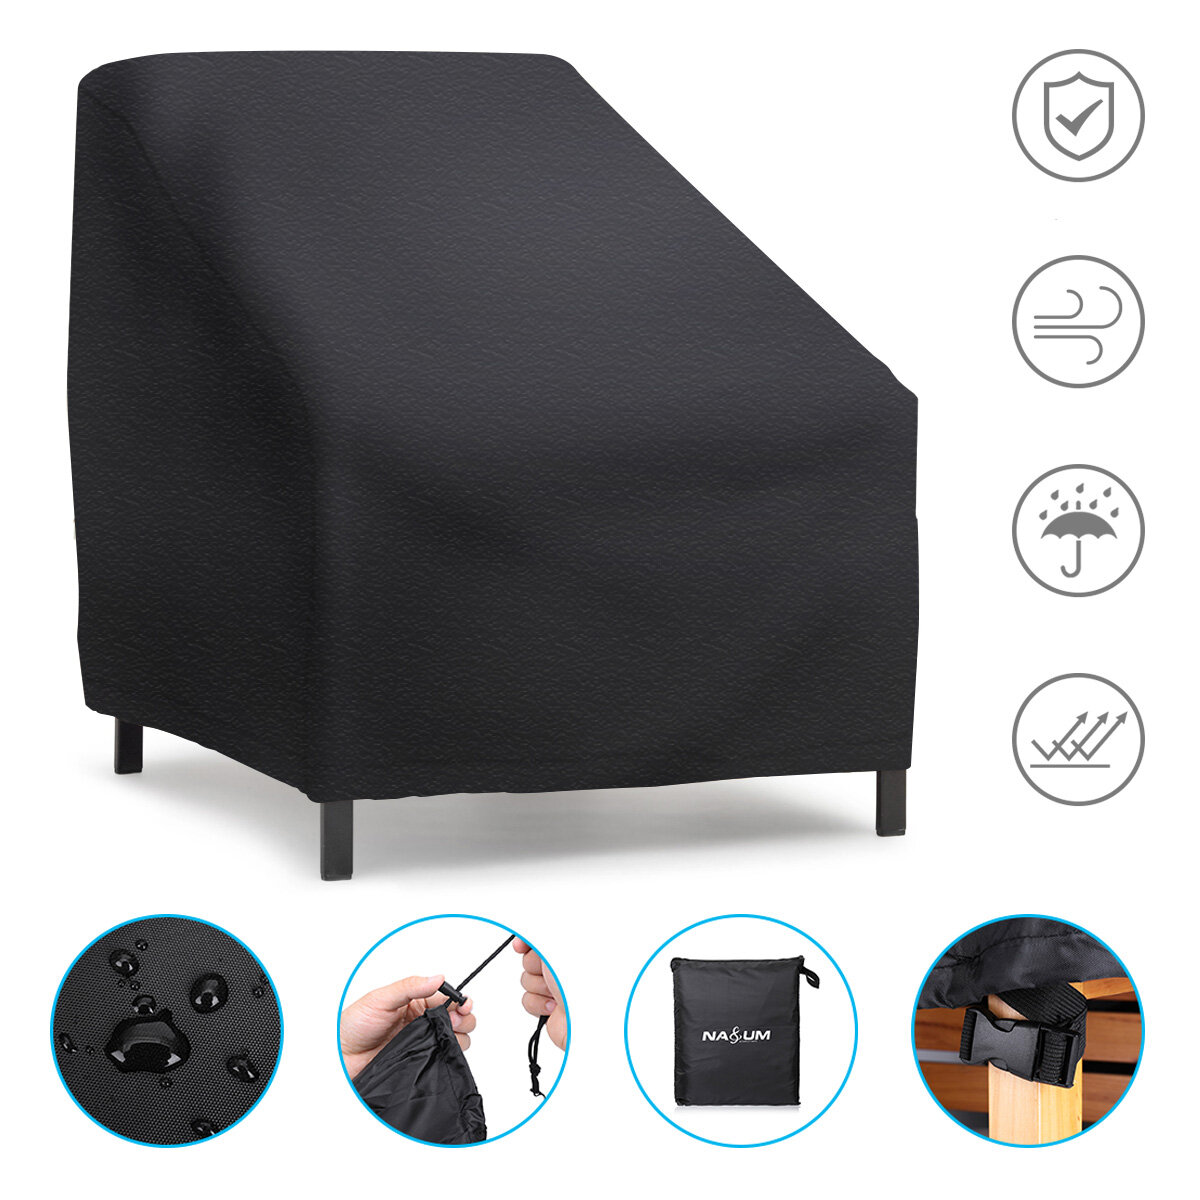 54x38x29'' Furniture Large Patio Seat Cover Waterproof Anti-UV Dustproof Durable Table Chair Cover Lounge Deep Chair Cover Patio Loveseat Cover Oxford Cloth Cover Outdoor Garden